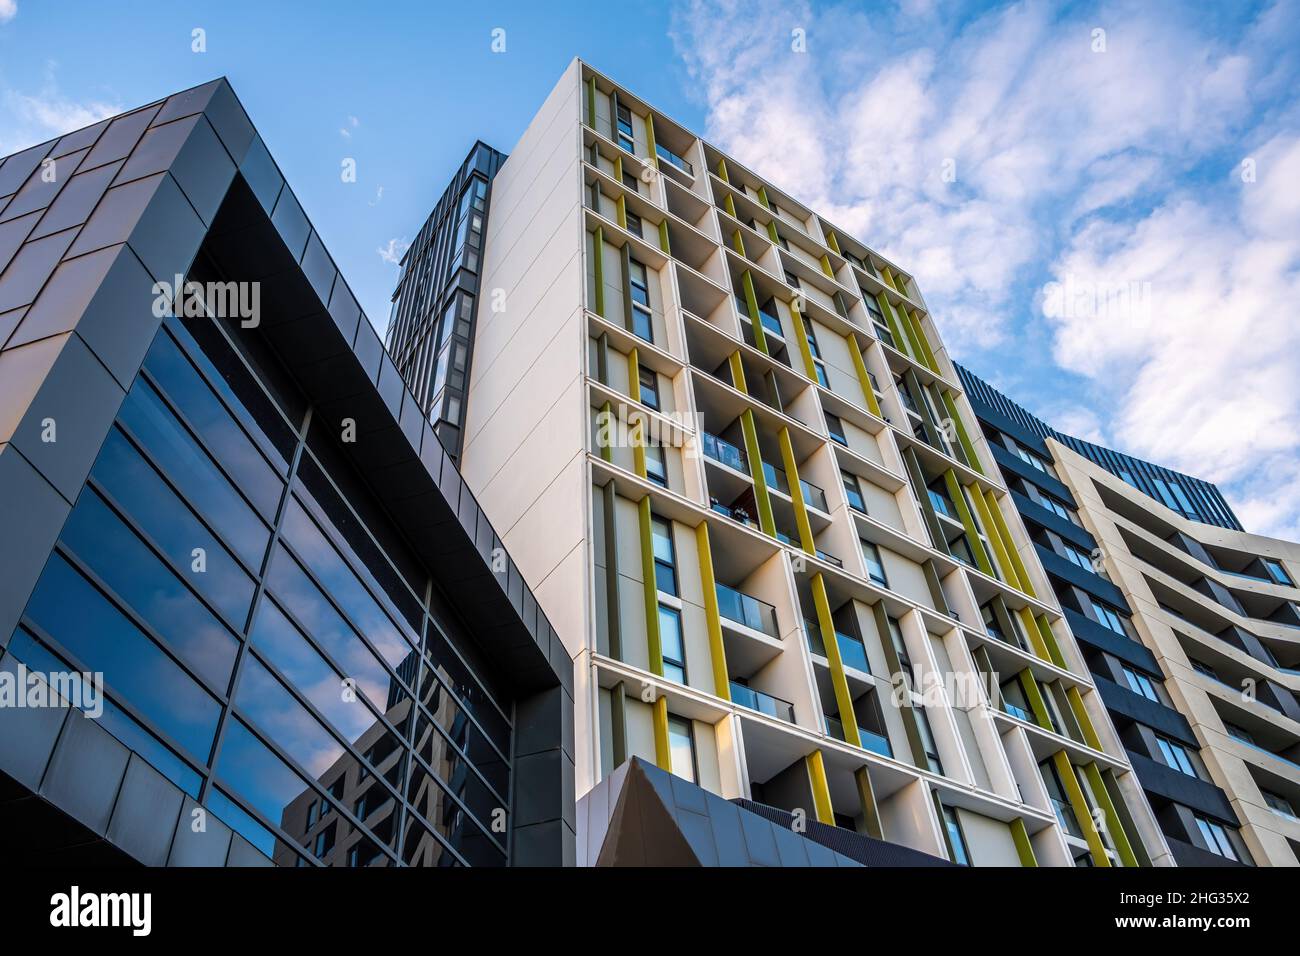 Looking up at modern residential buildings and blue sky Stock Photo